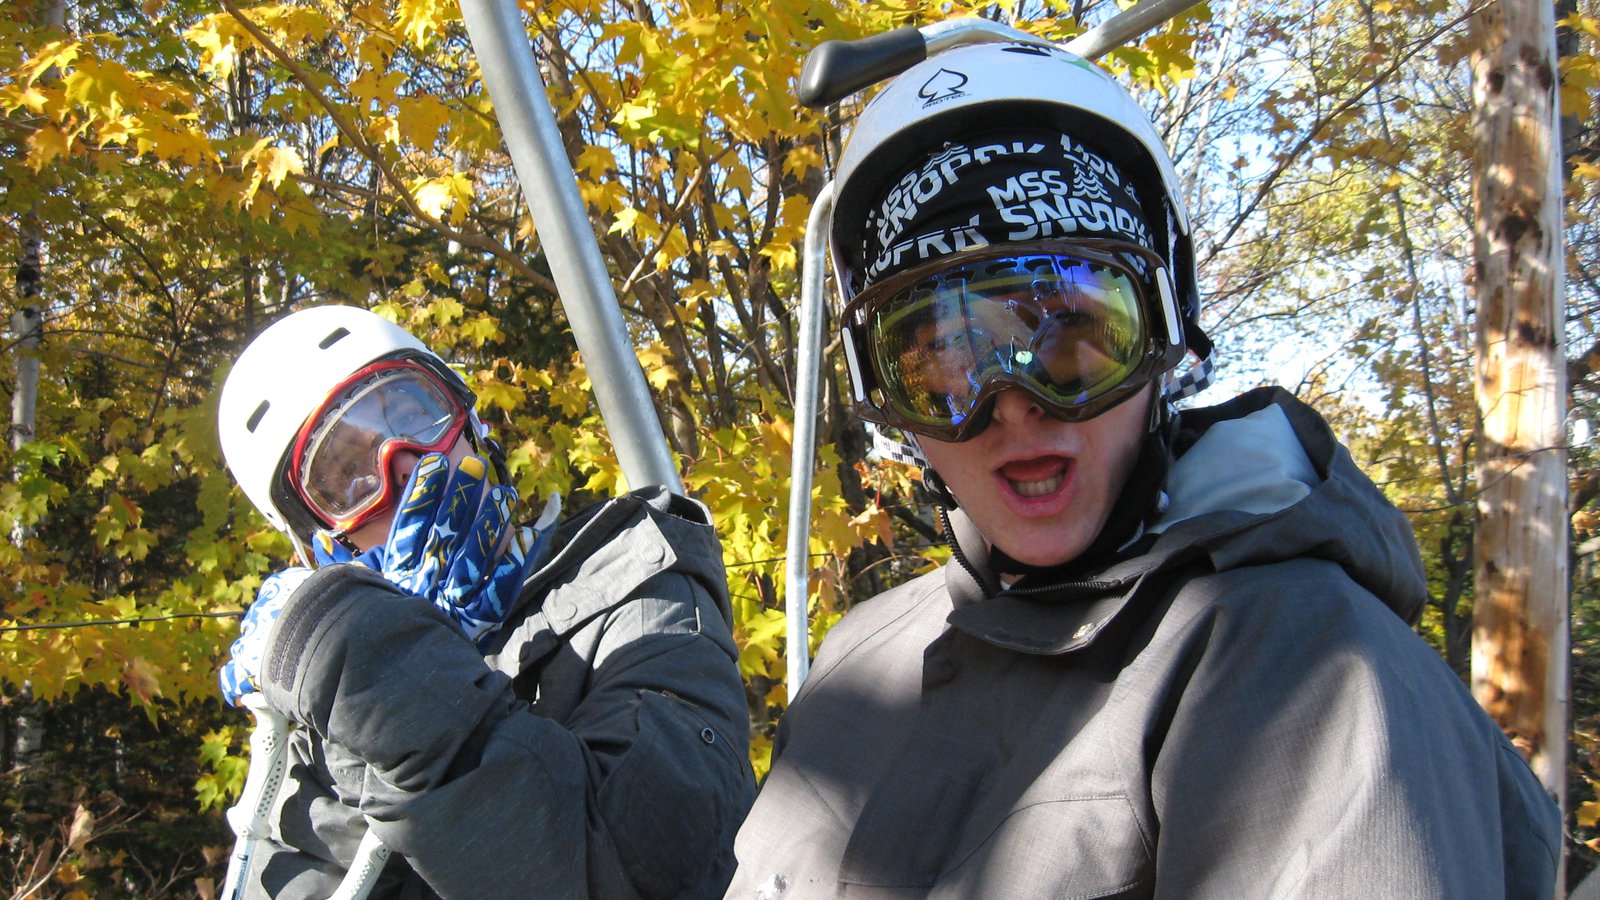 Boys in the chairlift